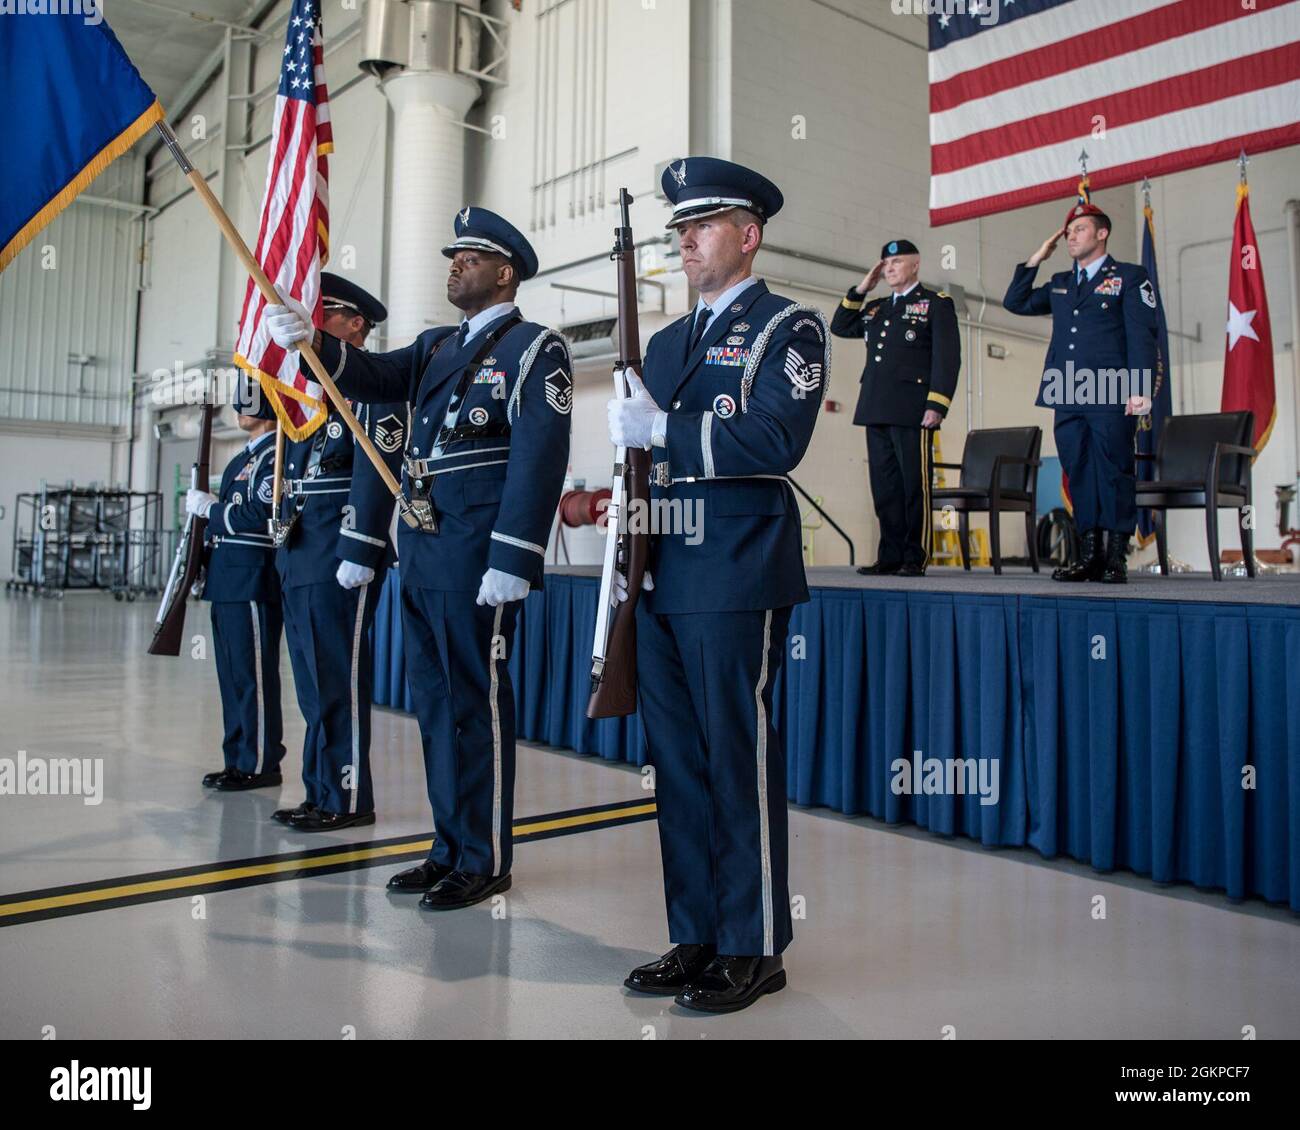 The 123rd Airlift Wing Honor Guard presents the colors during a ceremony at the Kentucky Air National Guard Base in Louisville, Ky., June 12, 2021, to bestow the Airman’s Medal to Master Sgt. Daniel Keller, a combat controller in the 123rd Special Tactics Squadron. Keller earned the award for heroism in recognition of his actions to save human life following a traffic accident near Louisville in 2018. Stock Photo